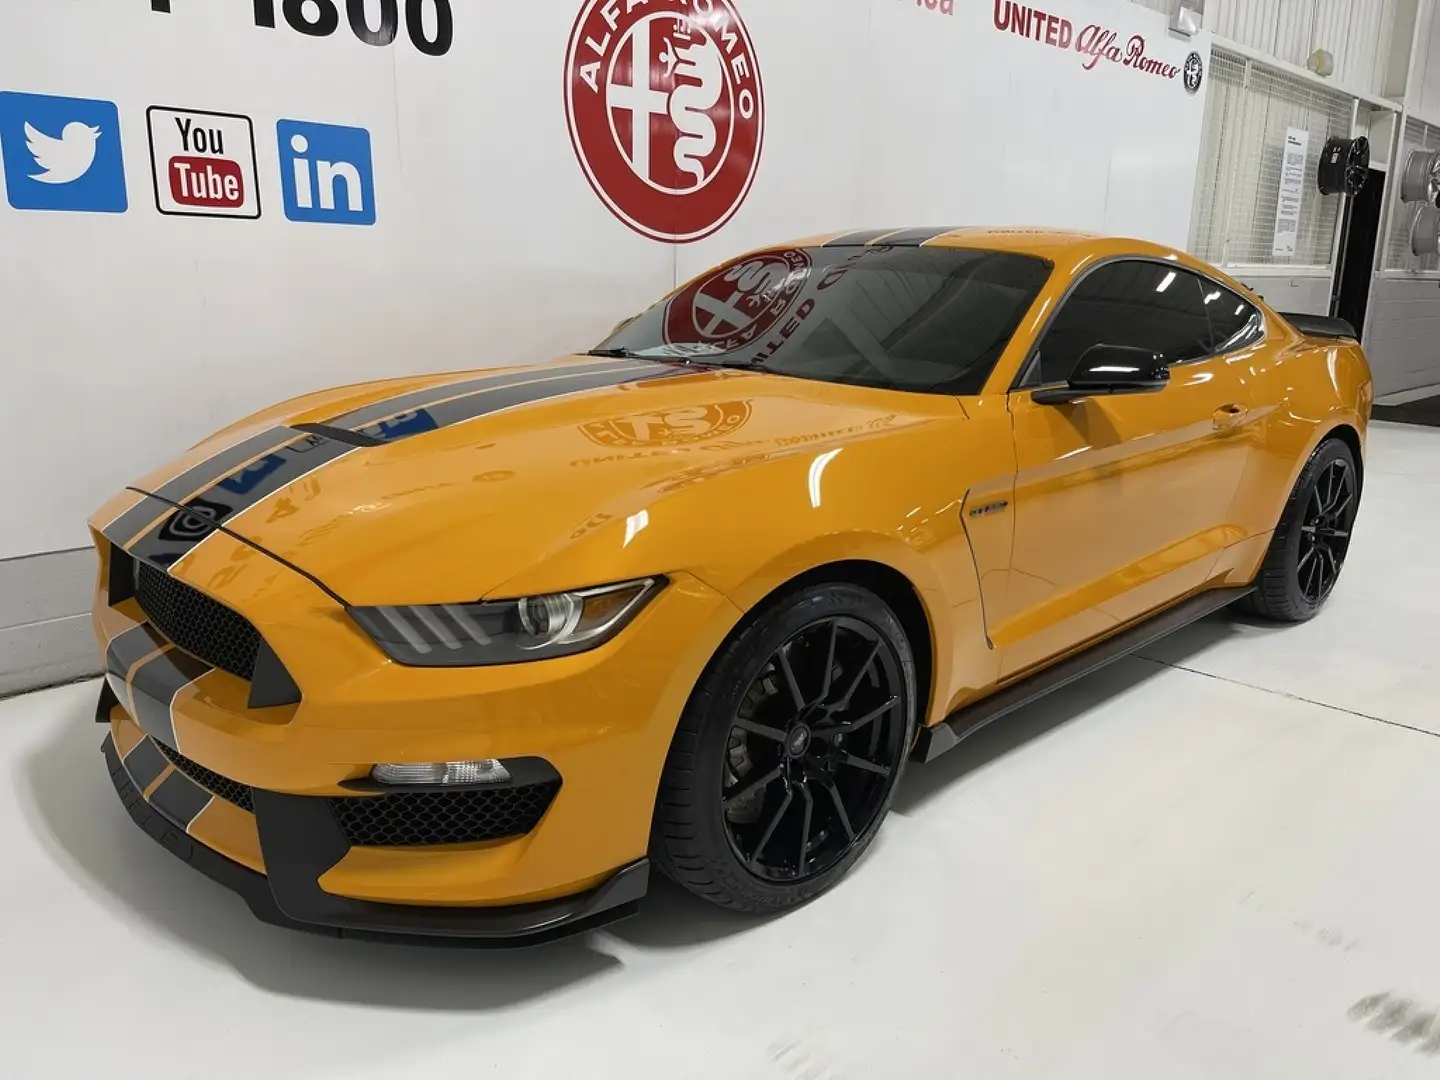 Ford Mustang SHELBY GT350 5.2L V8 GT 350 2018 - 1